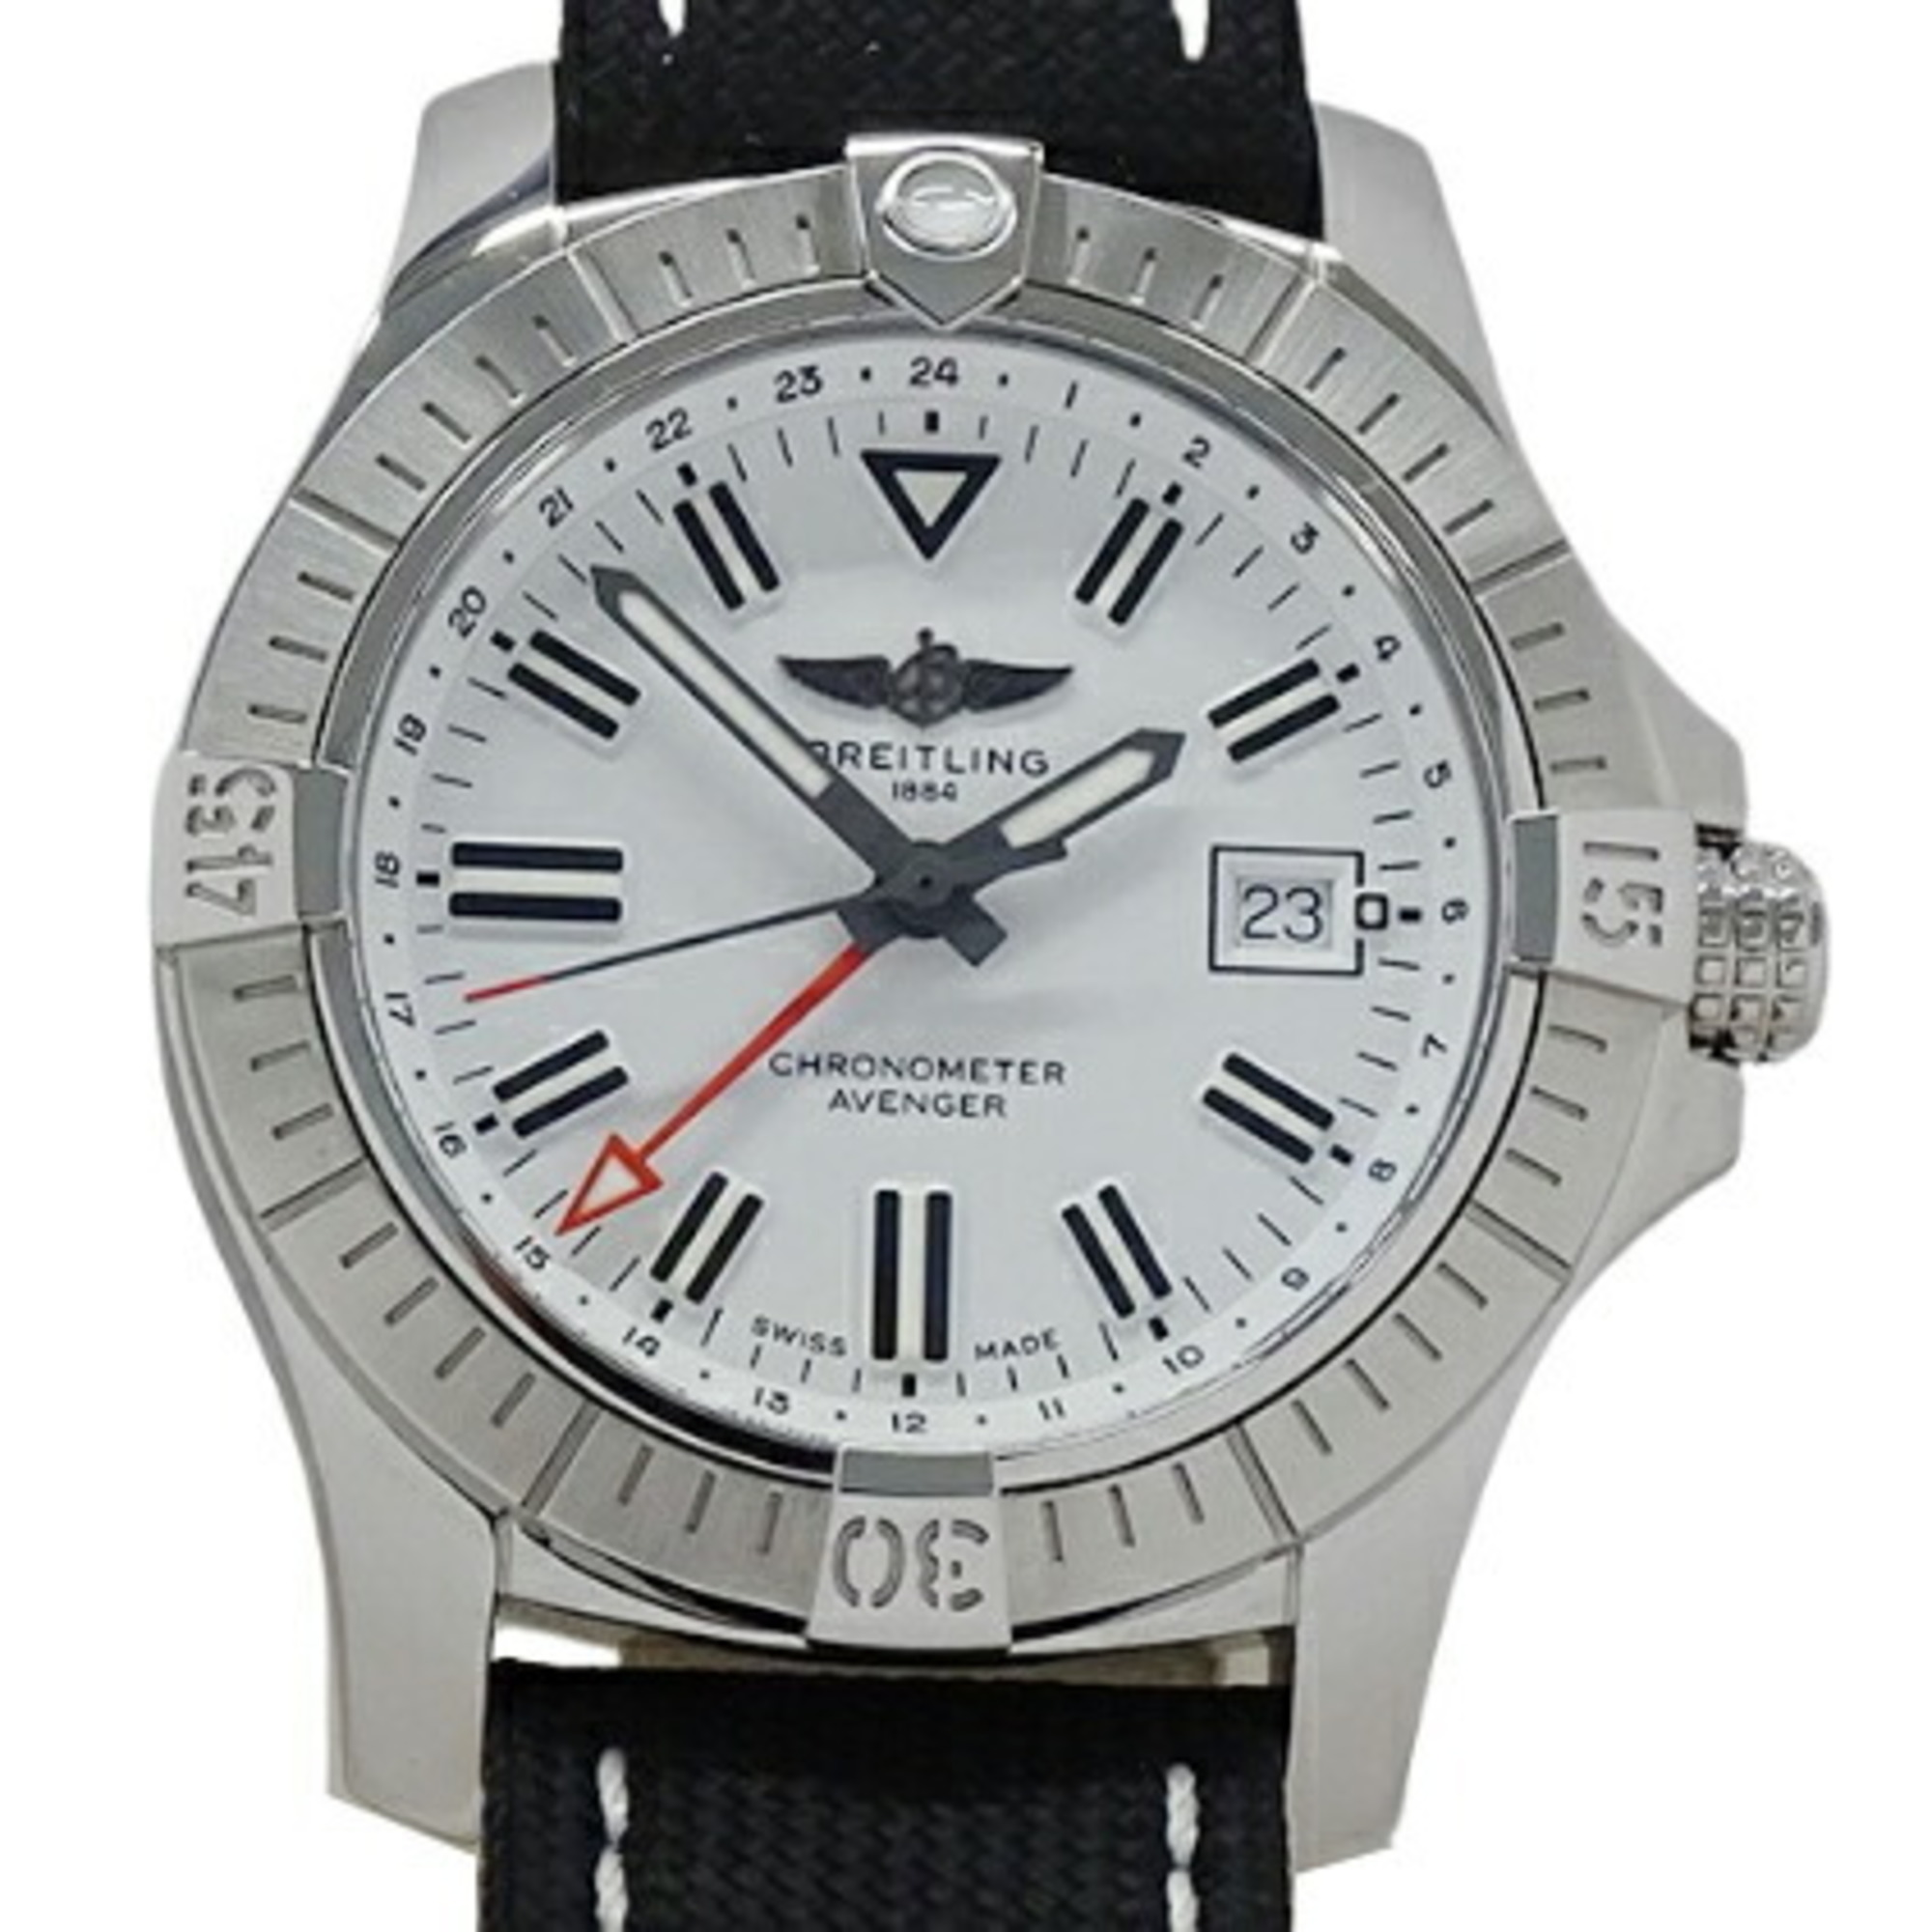 Breitling Avenger A32397 Watch Men's Date Chronometer Automatic Winding AT Stainless Steel SS Leather